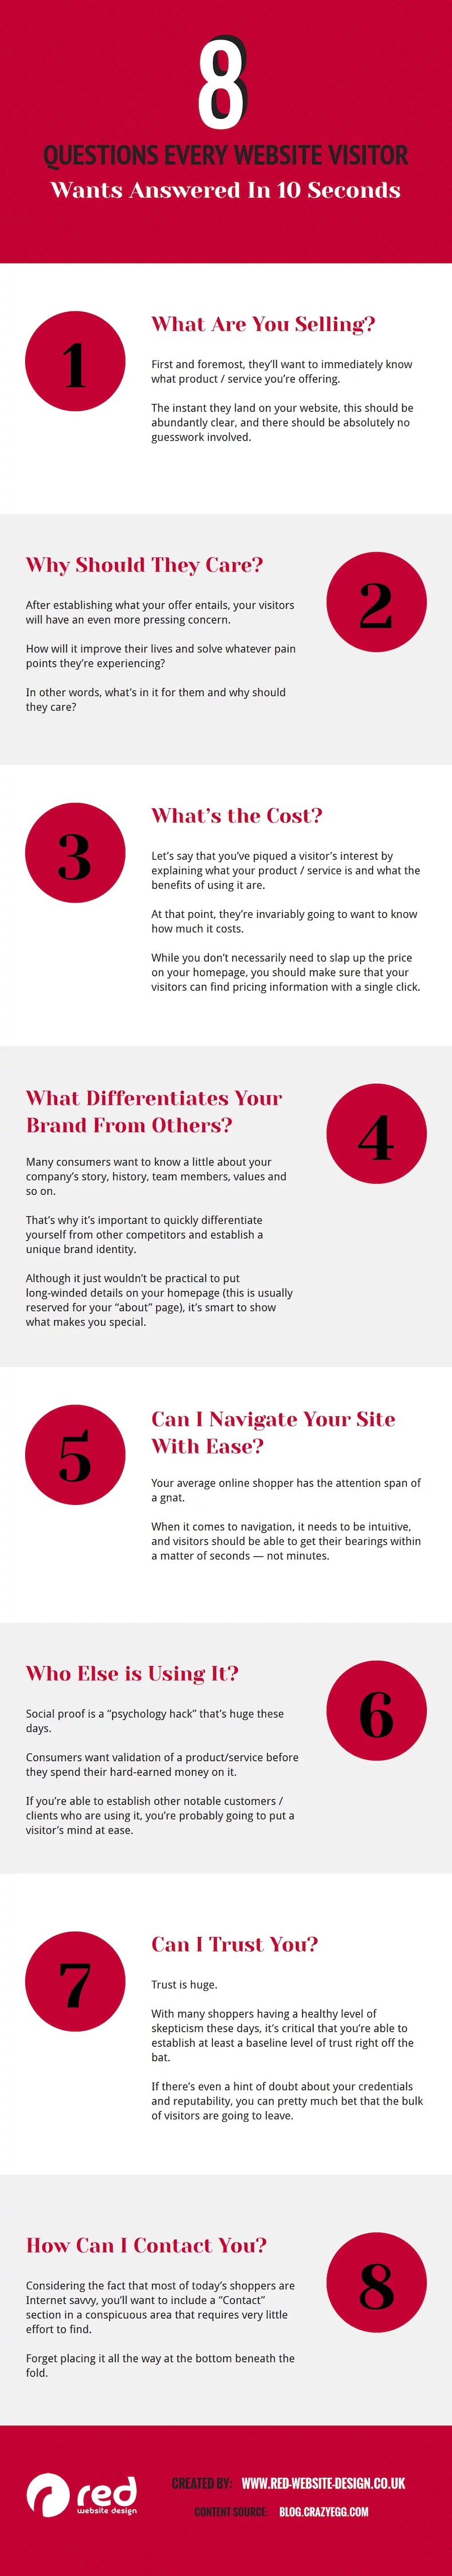 8 questions every website visitor wants answered in 10 seconds infographic